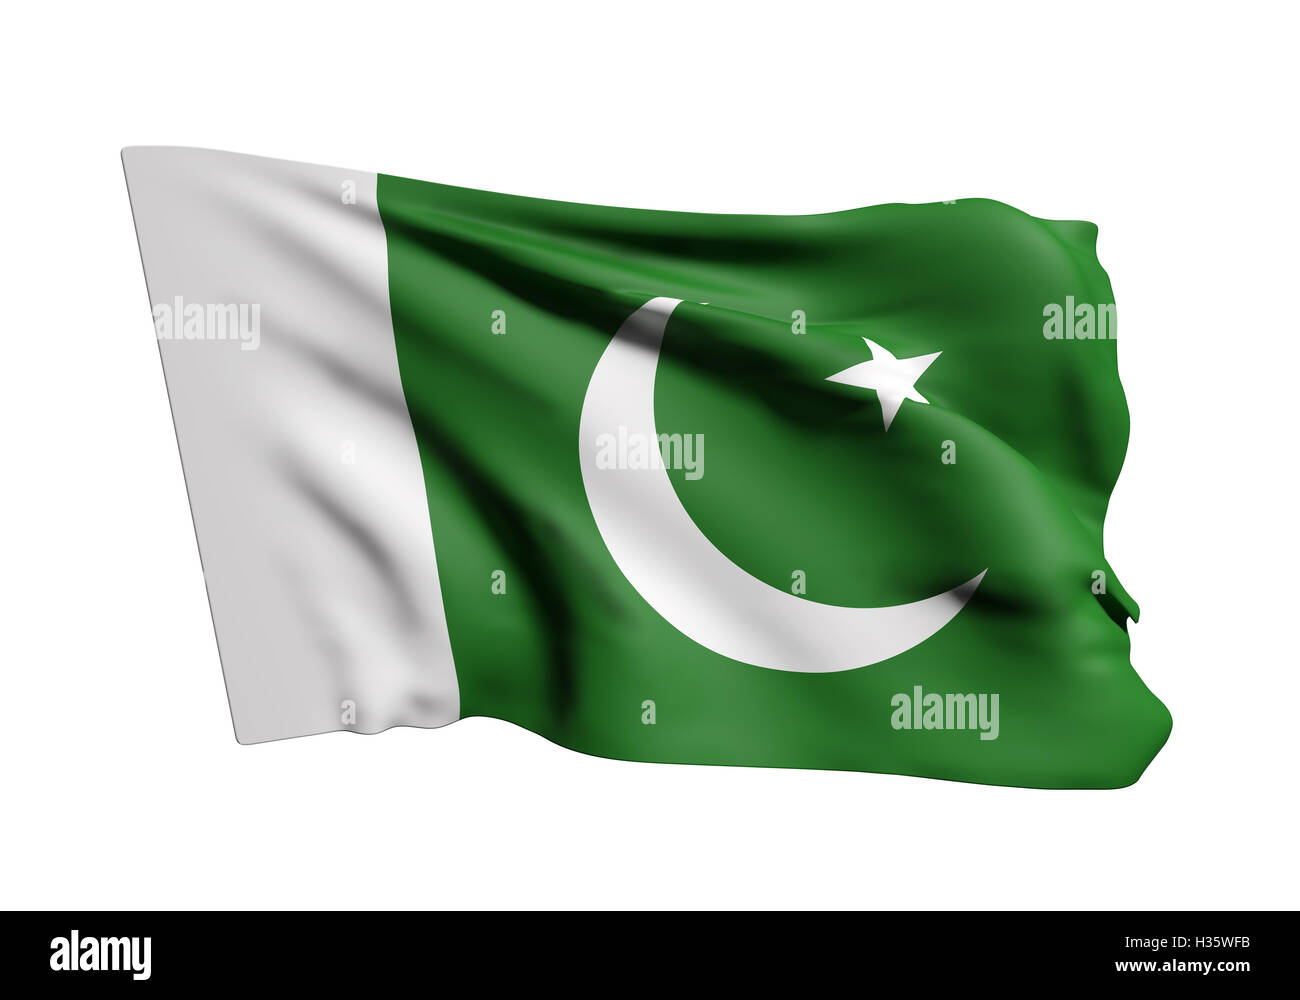 3d rendering of Islamic Republic of Pakistan flag waving on white background Stock Photo